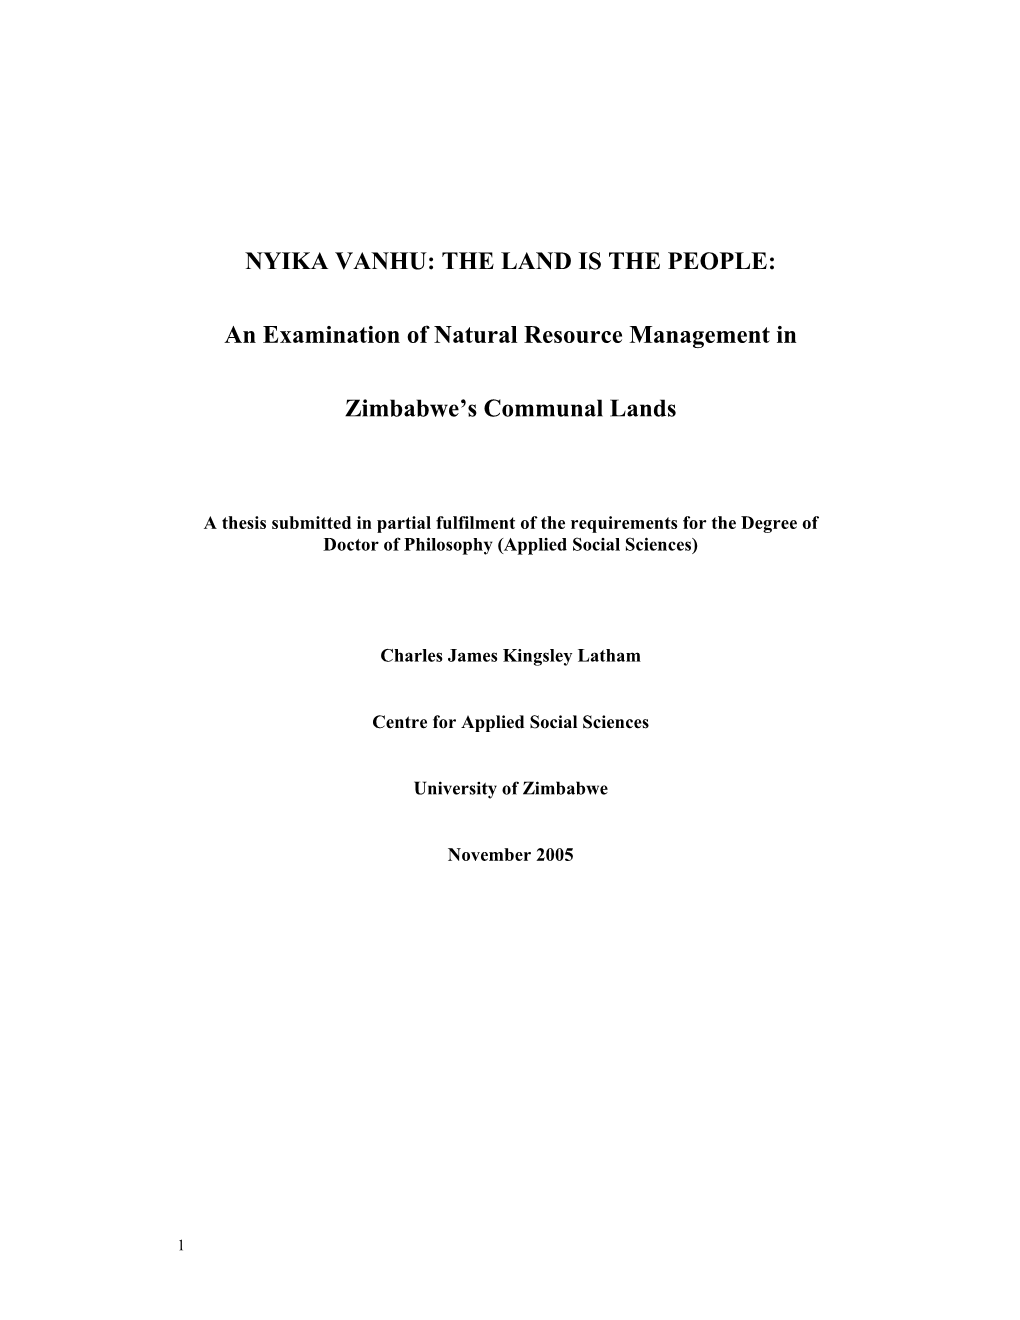 An Examination of Natural Resource Management in Zimbabwe's Communal Lands